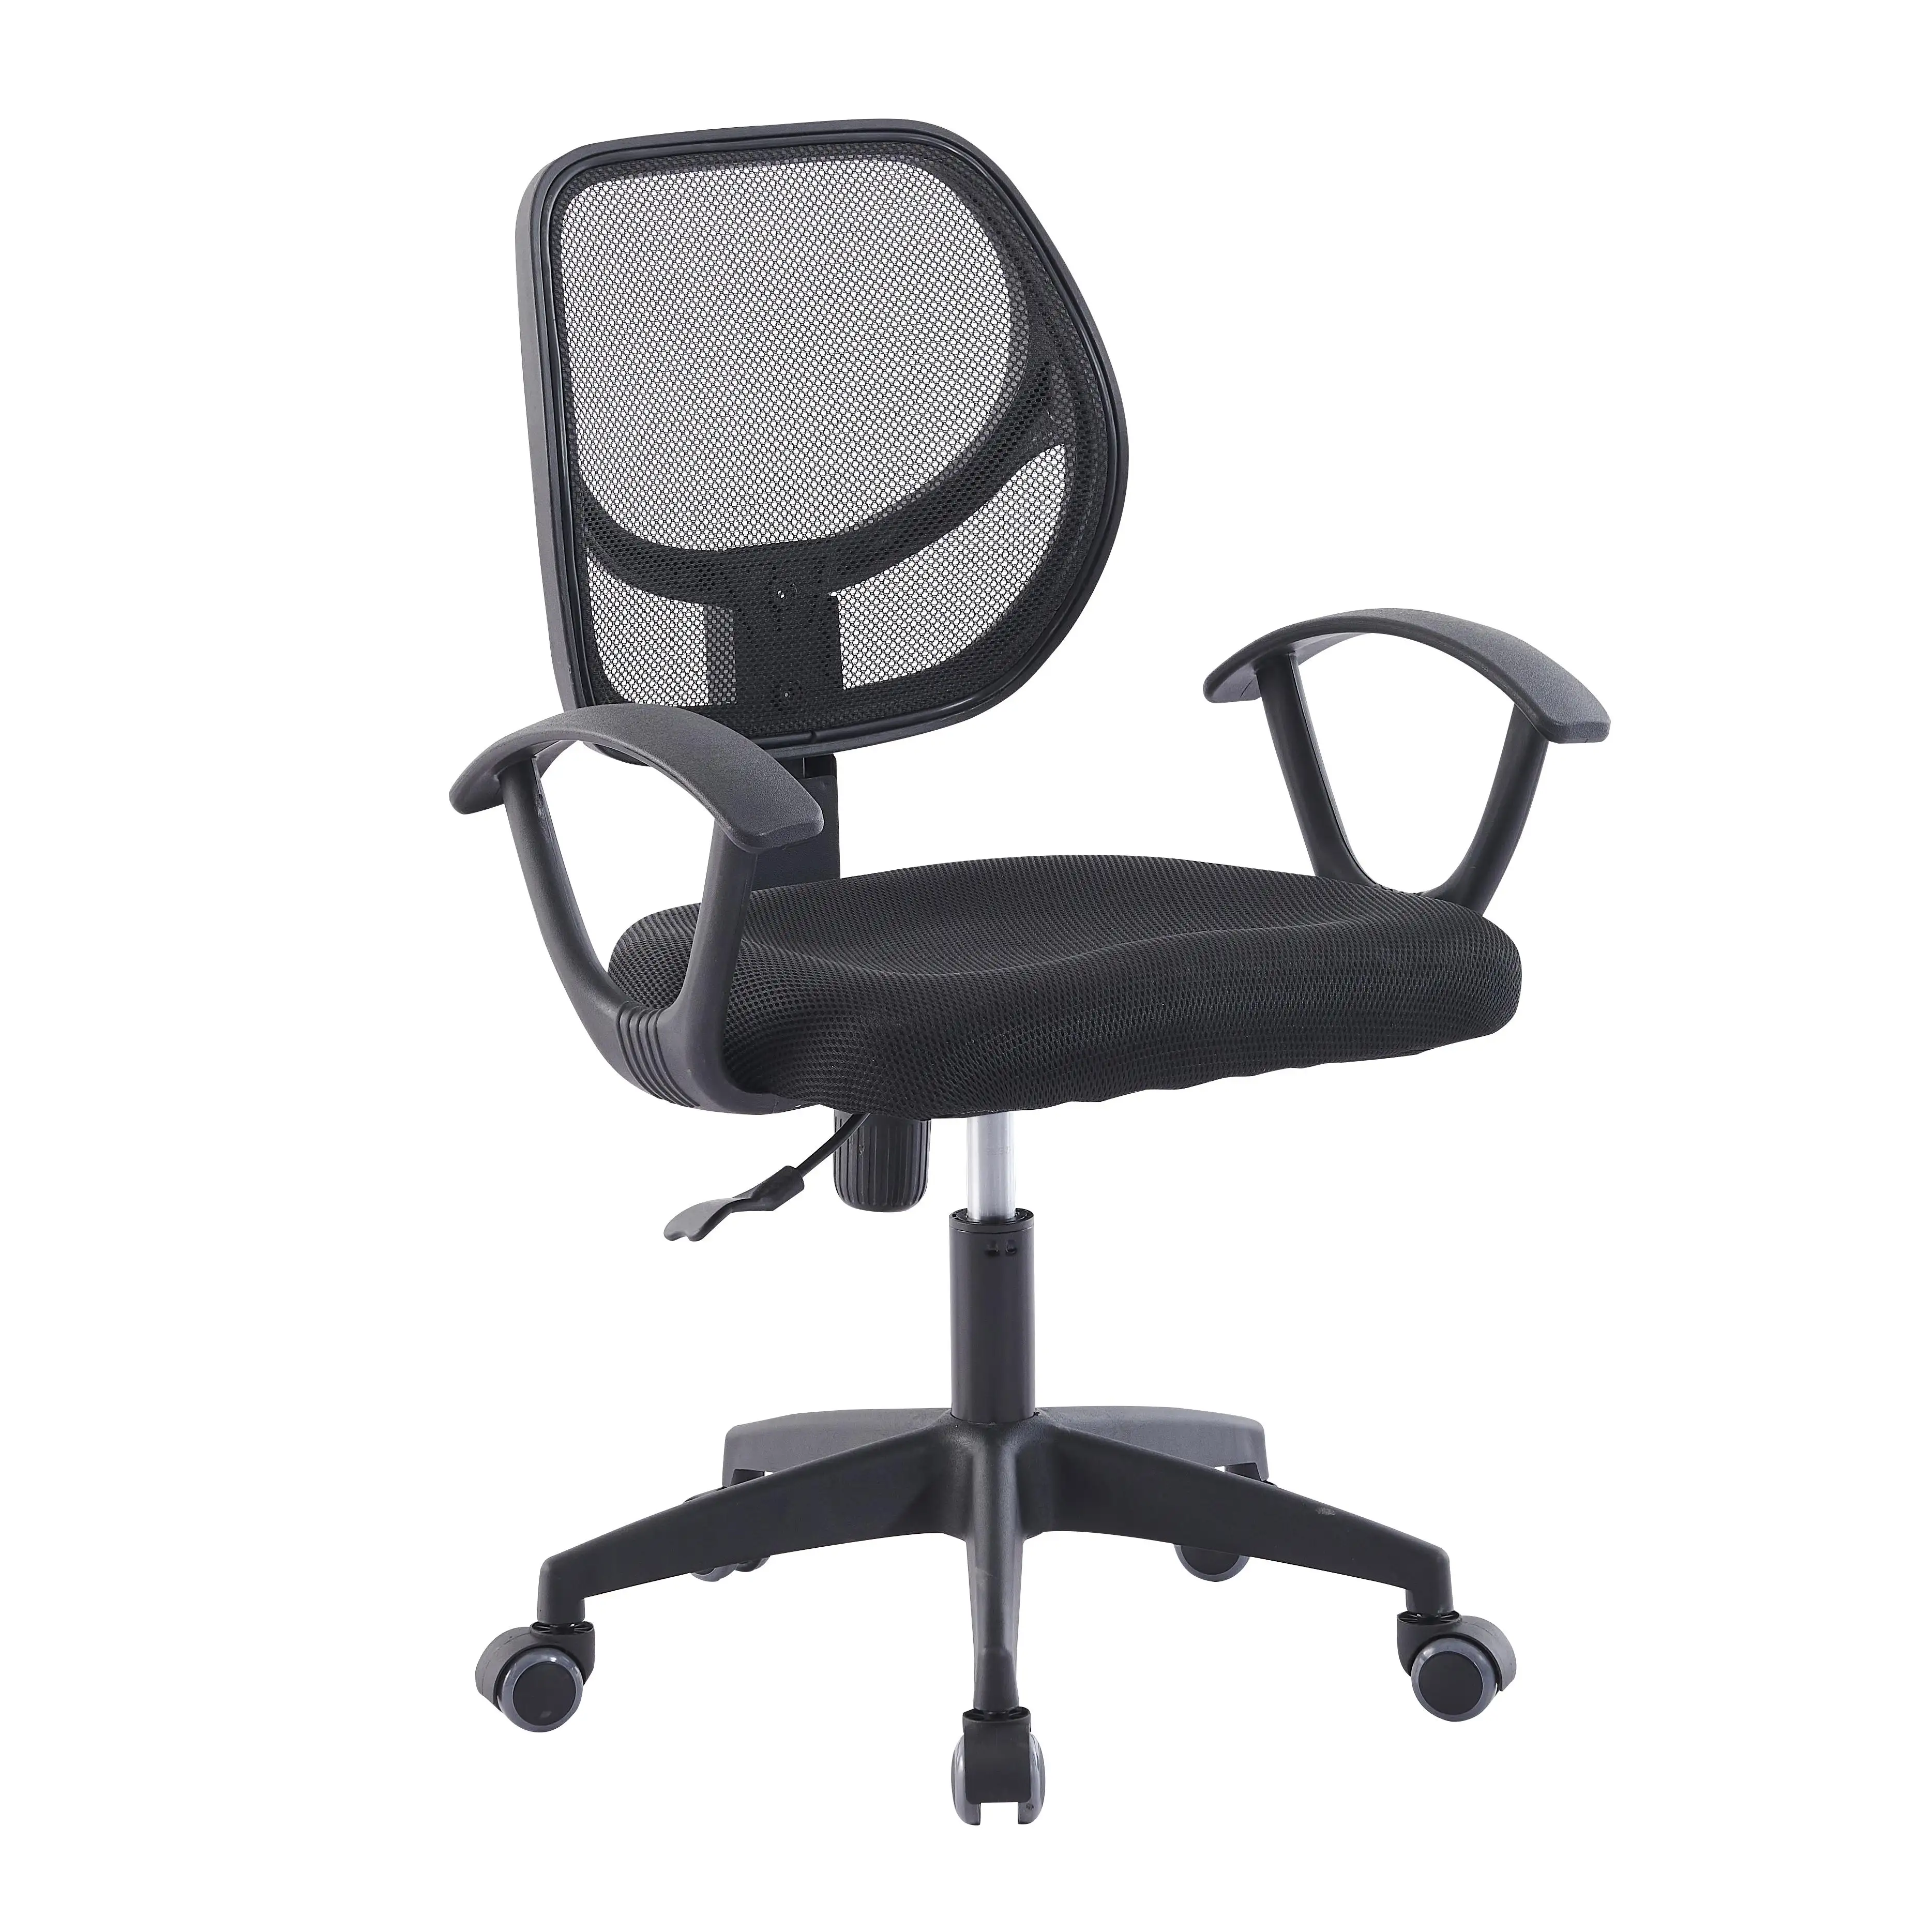 low price ergonomic mesh seat and backrest staff fabric office chair computer saddle study chair adjustable height with armrest